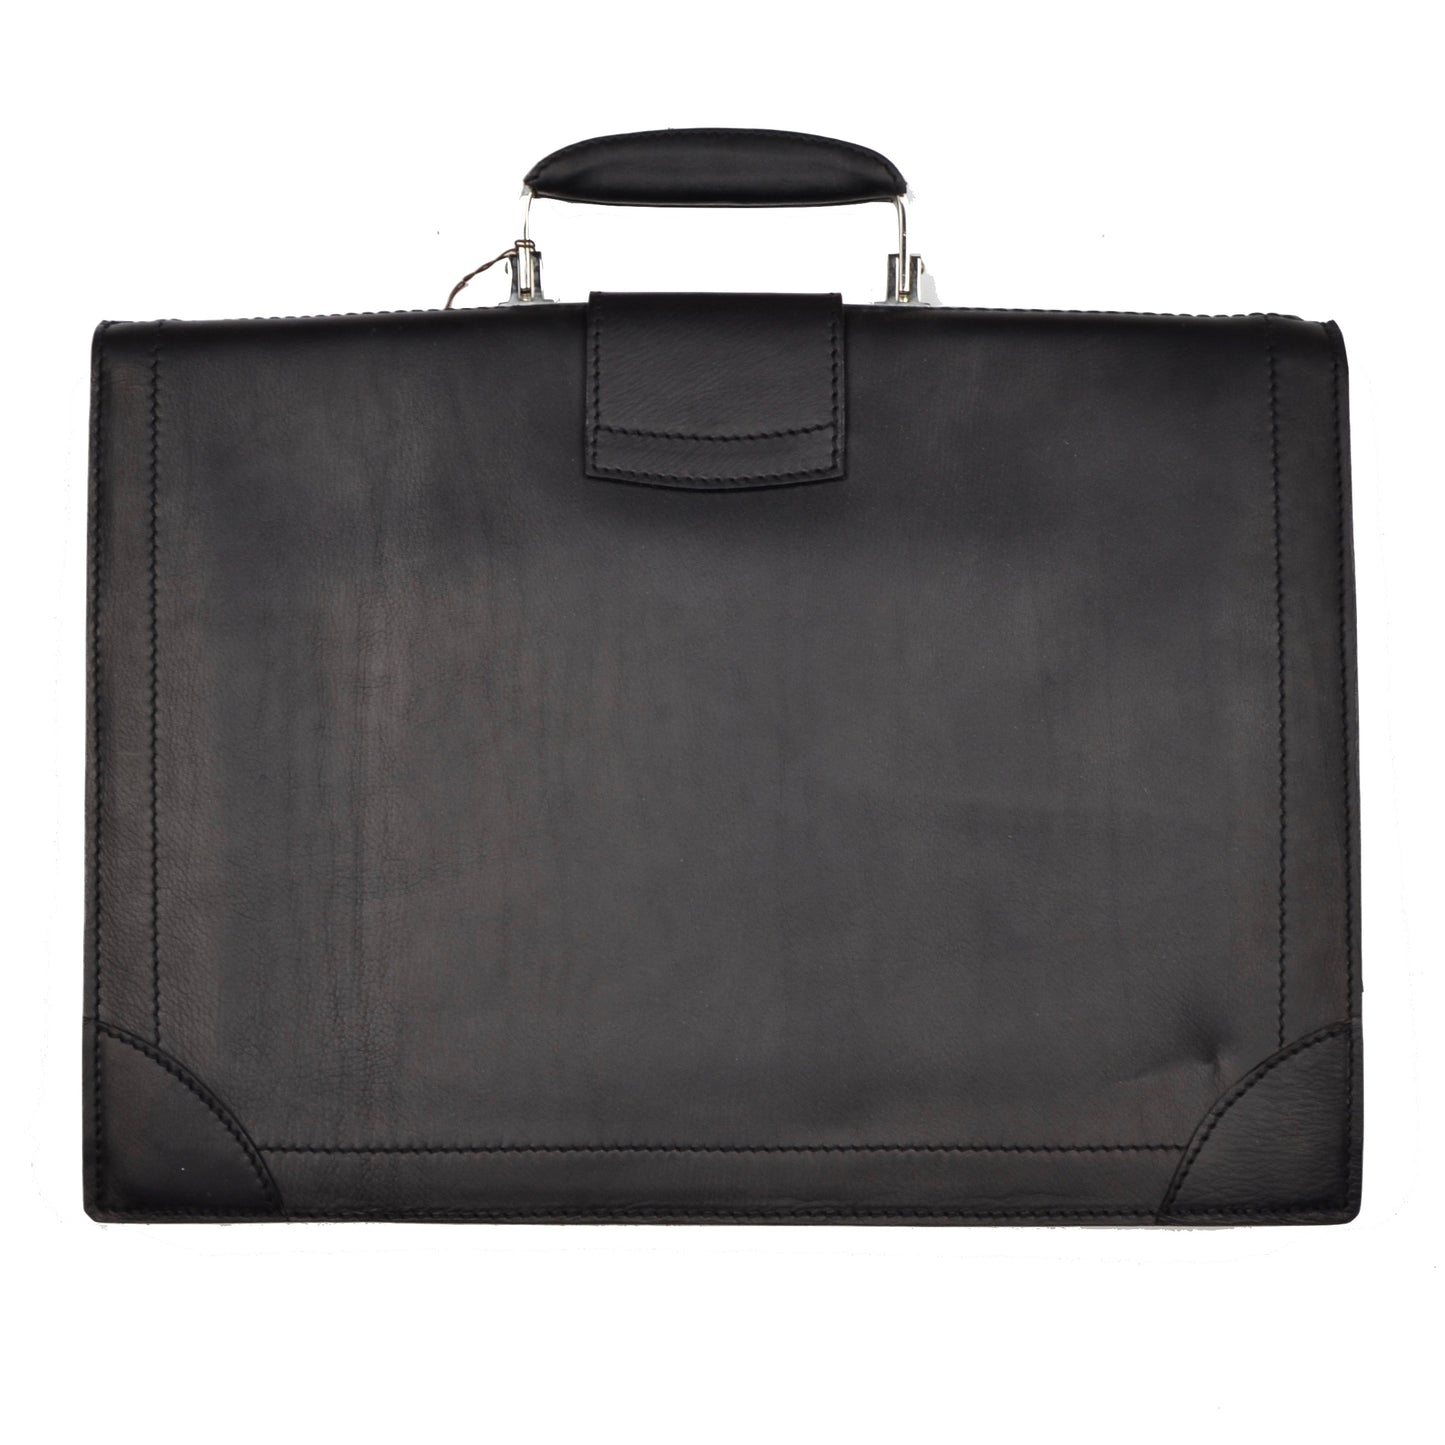 Seeger Germany Oiled Leather Briefcase - Black